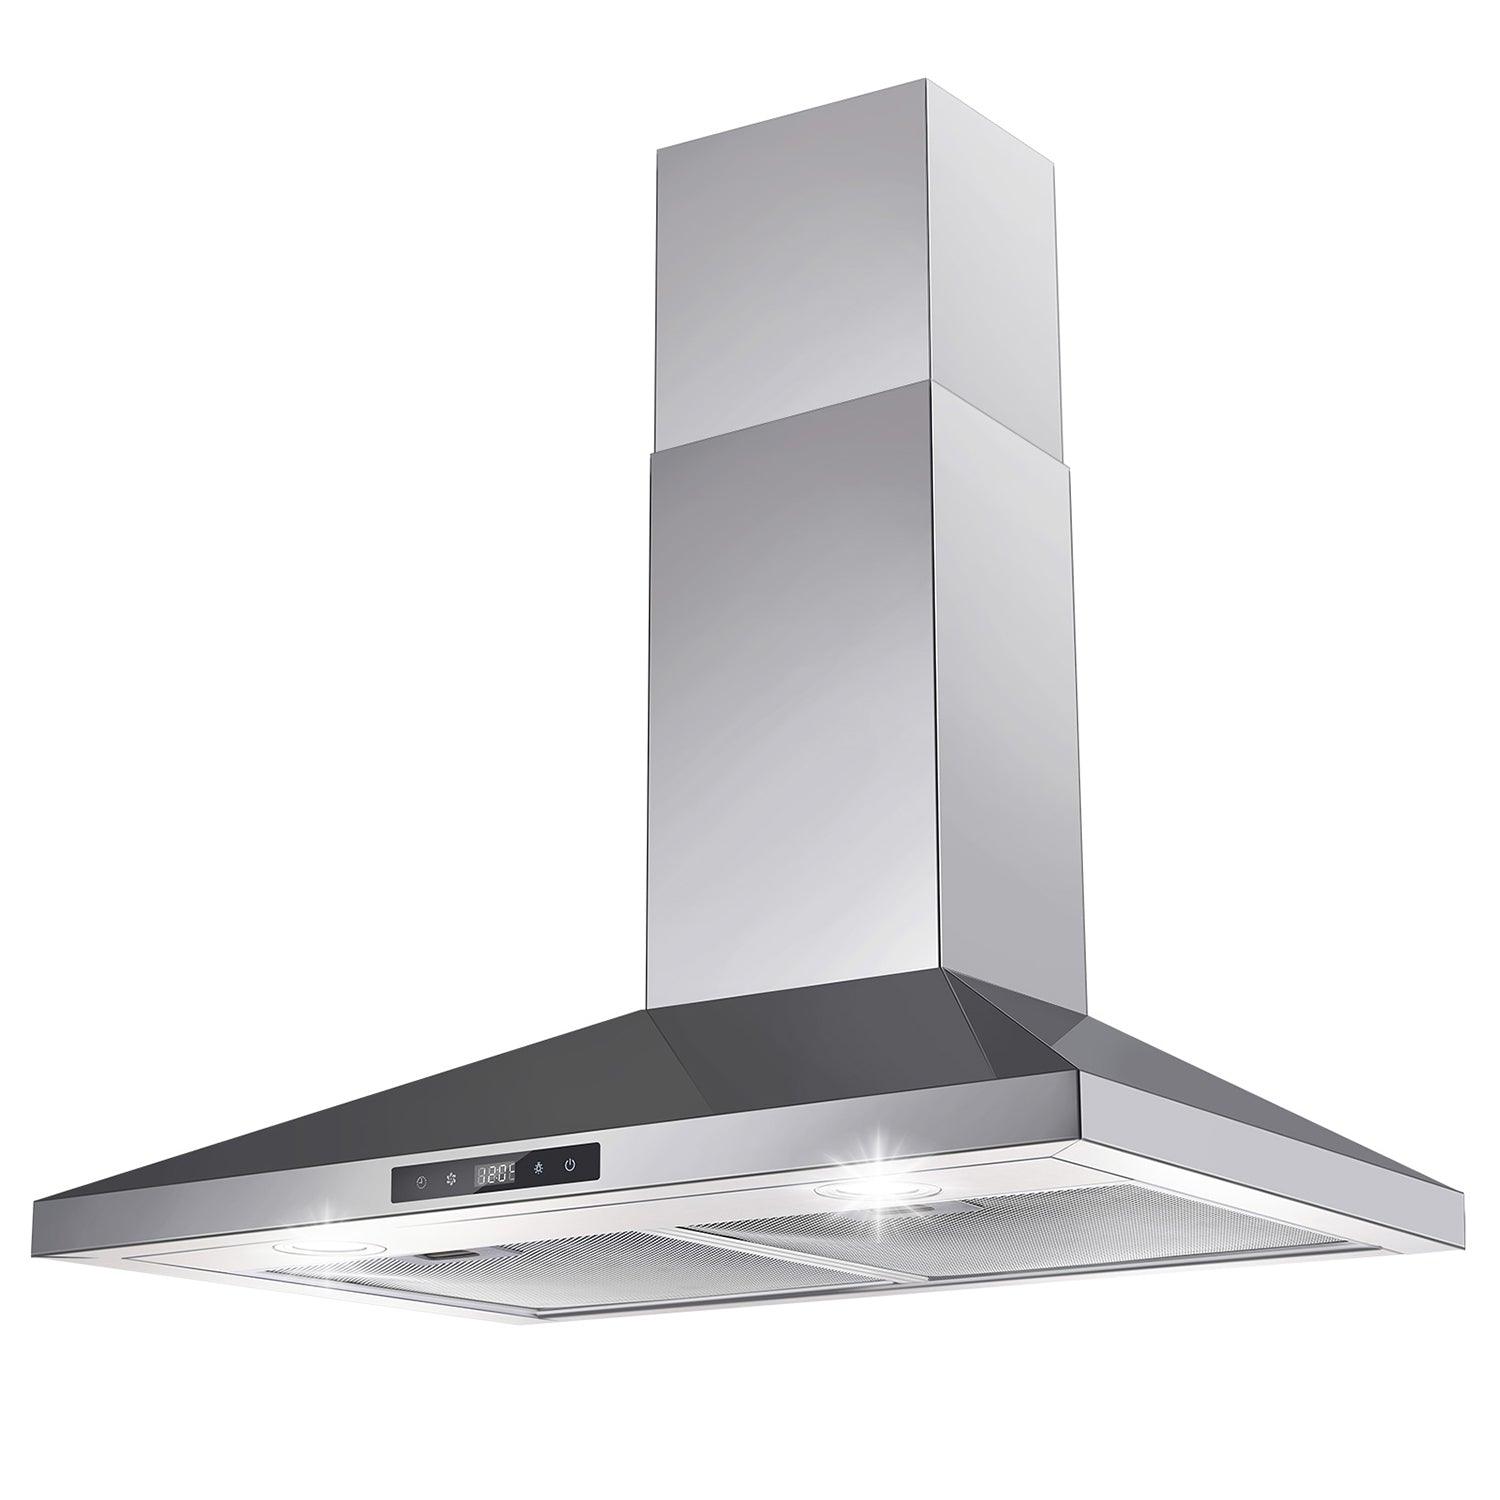 Tieasy Range Hood 30 inch 230 CFM Under Cabinet, Ducted/Ductless Black+Grease Filter(Ductless)